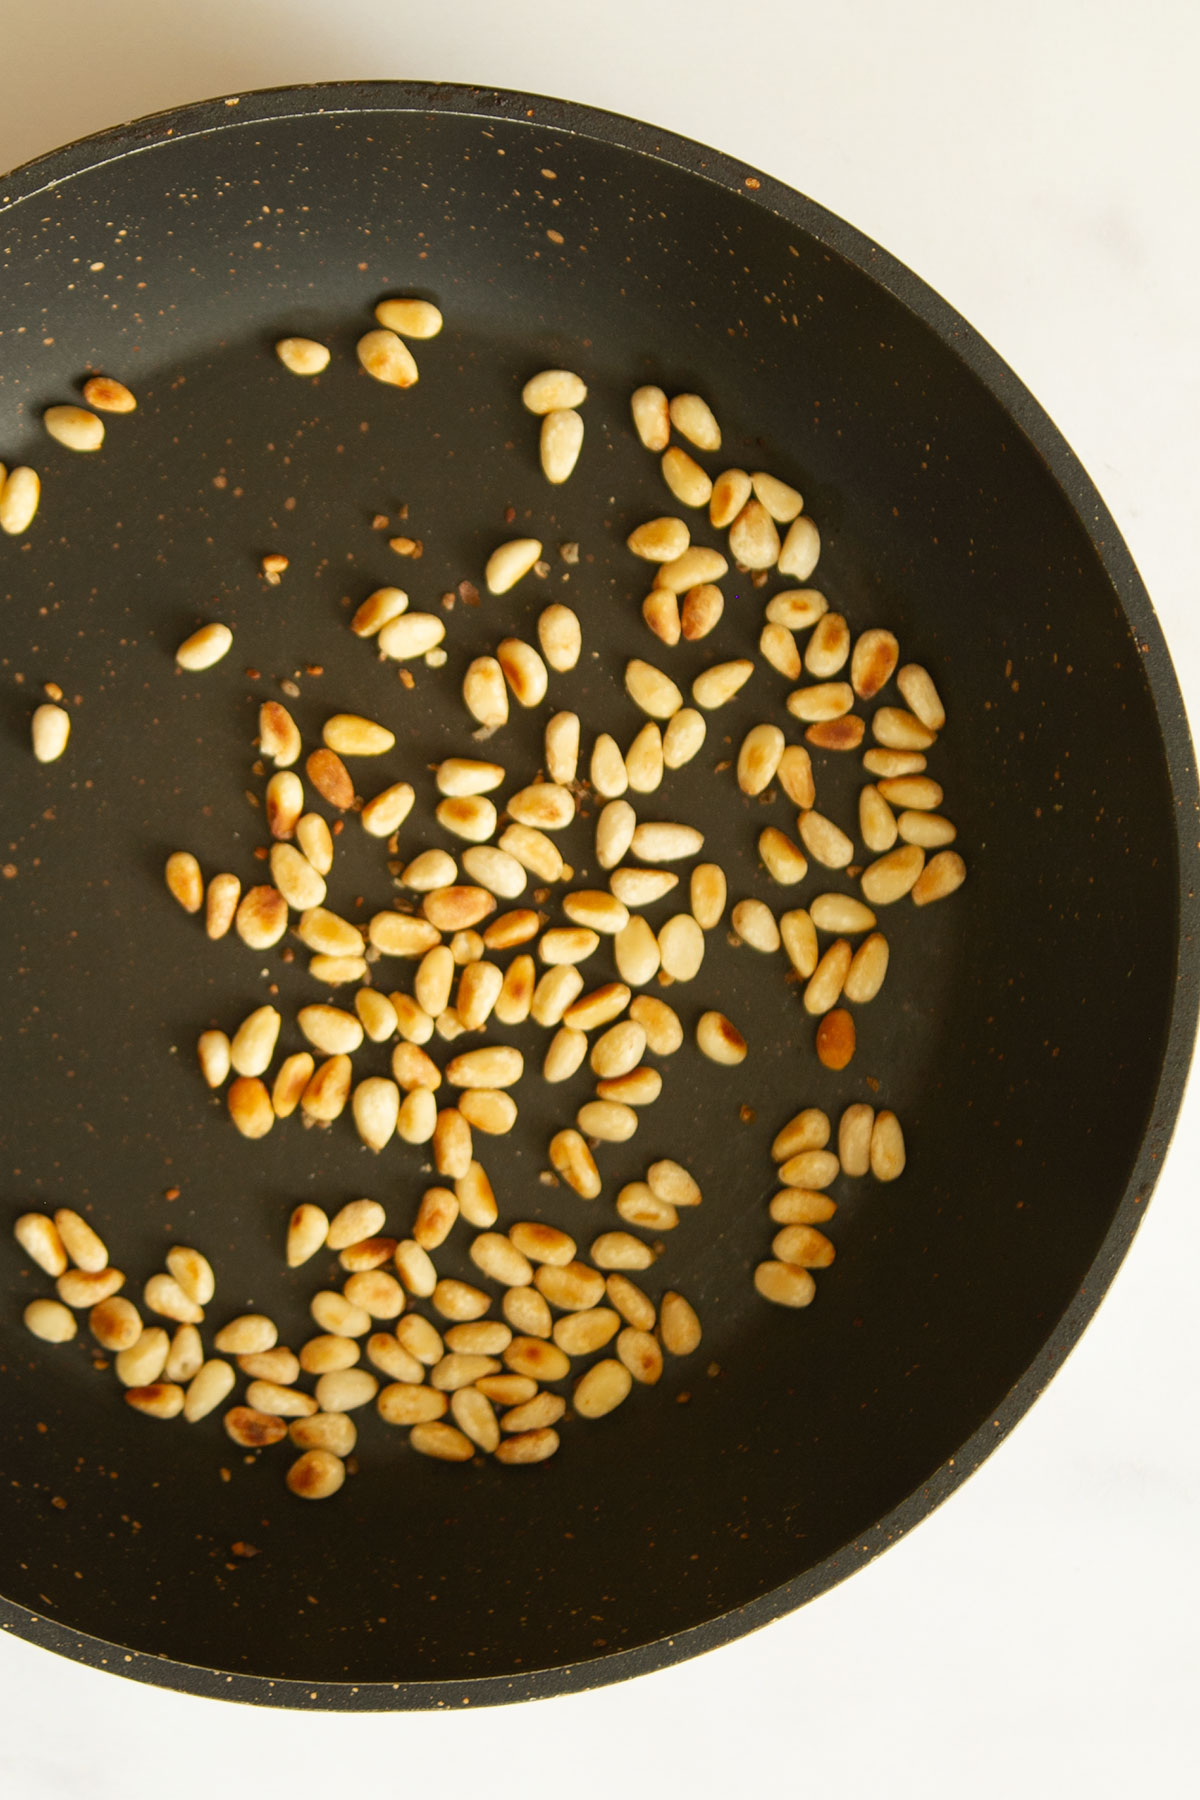 Toasted pine nuts in a black pan.